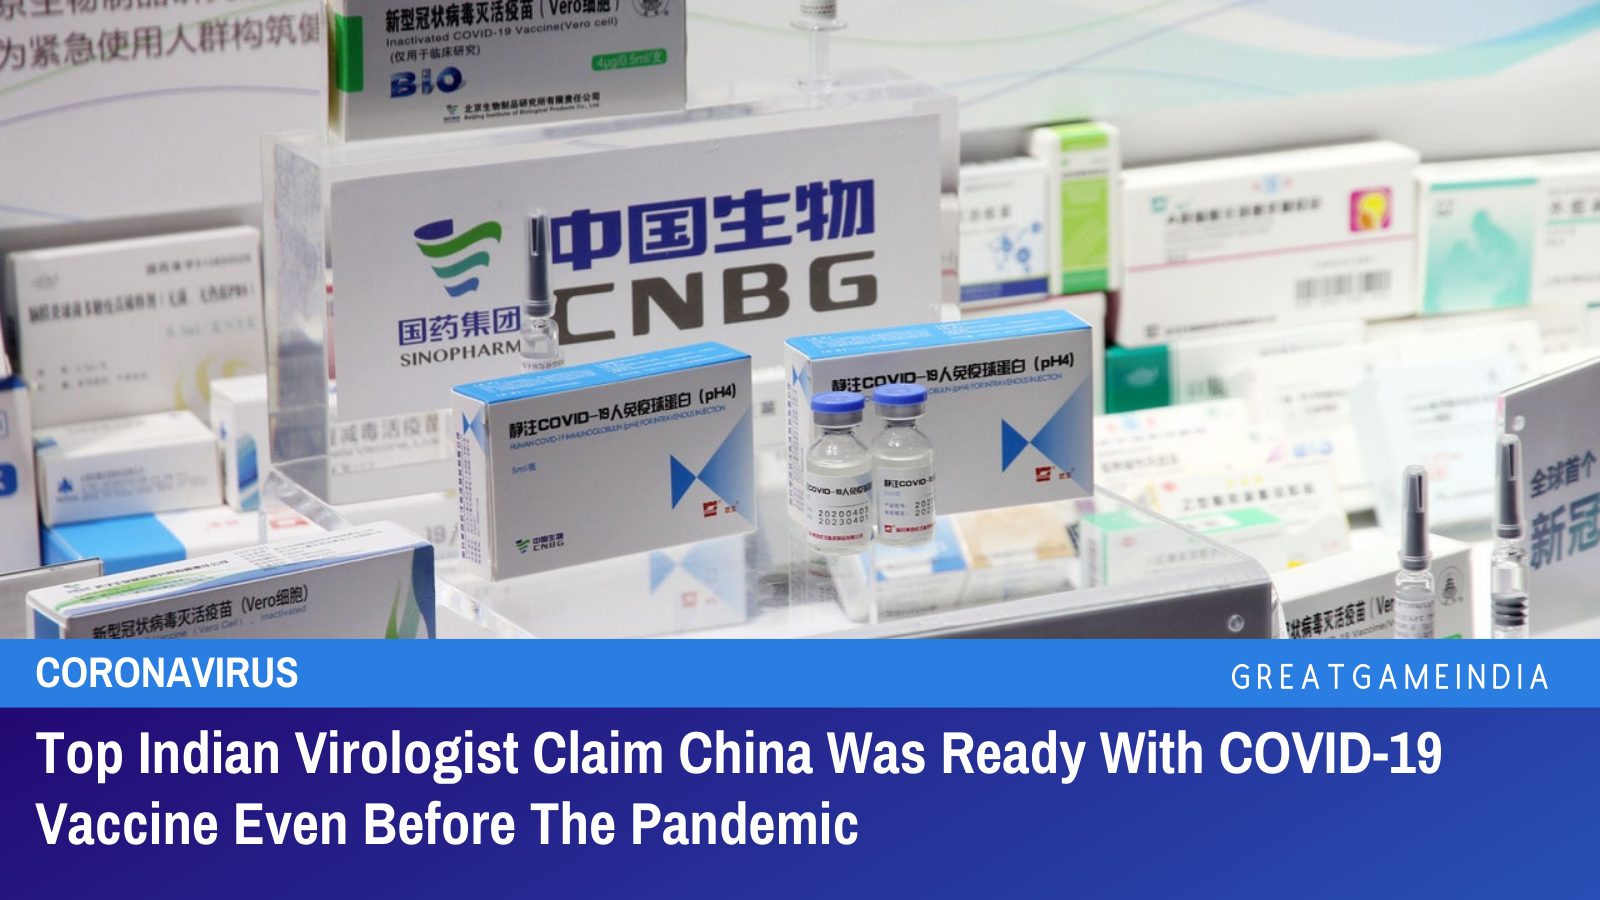 Top Indian Virologist Claim China Was Ready With COVID-19 Vaccine Even Before The Pandemic